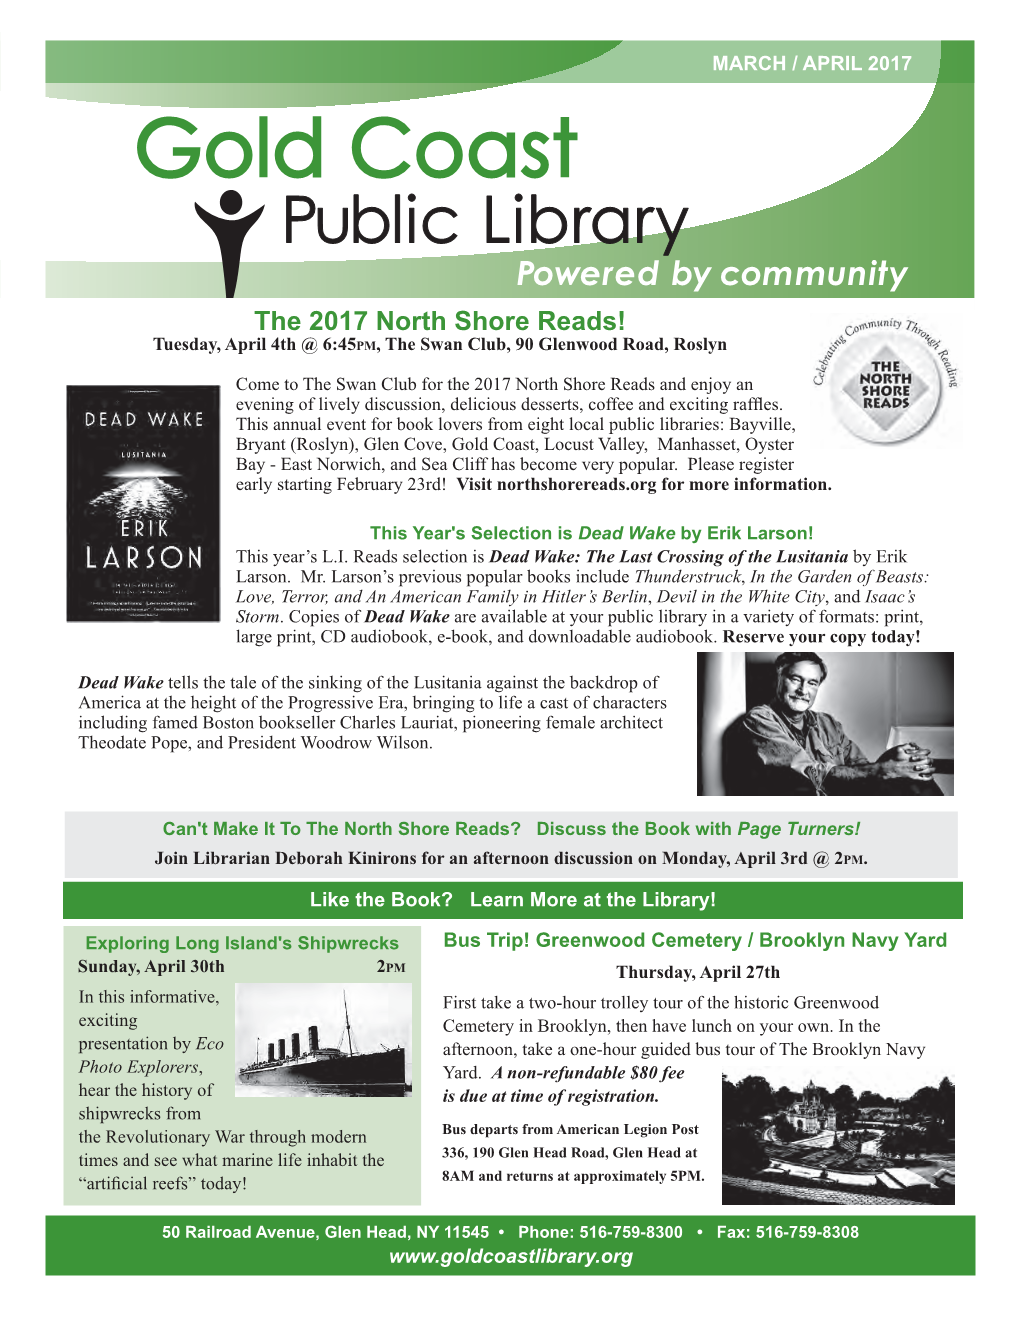 The 2017 North Shore Reads! Tuesday, April 4Th @ 6:45PM, the Swan Club, 90 Glenwood Road, Roslyn